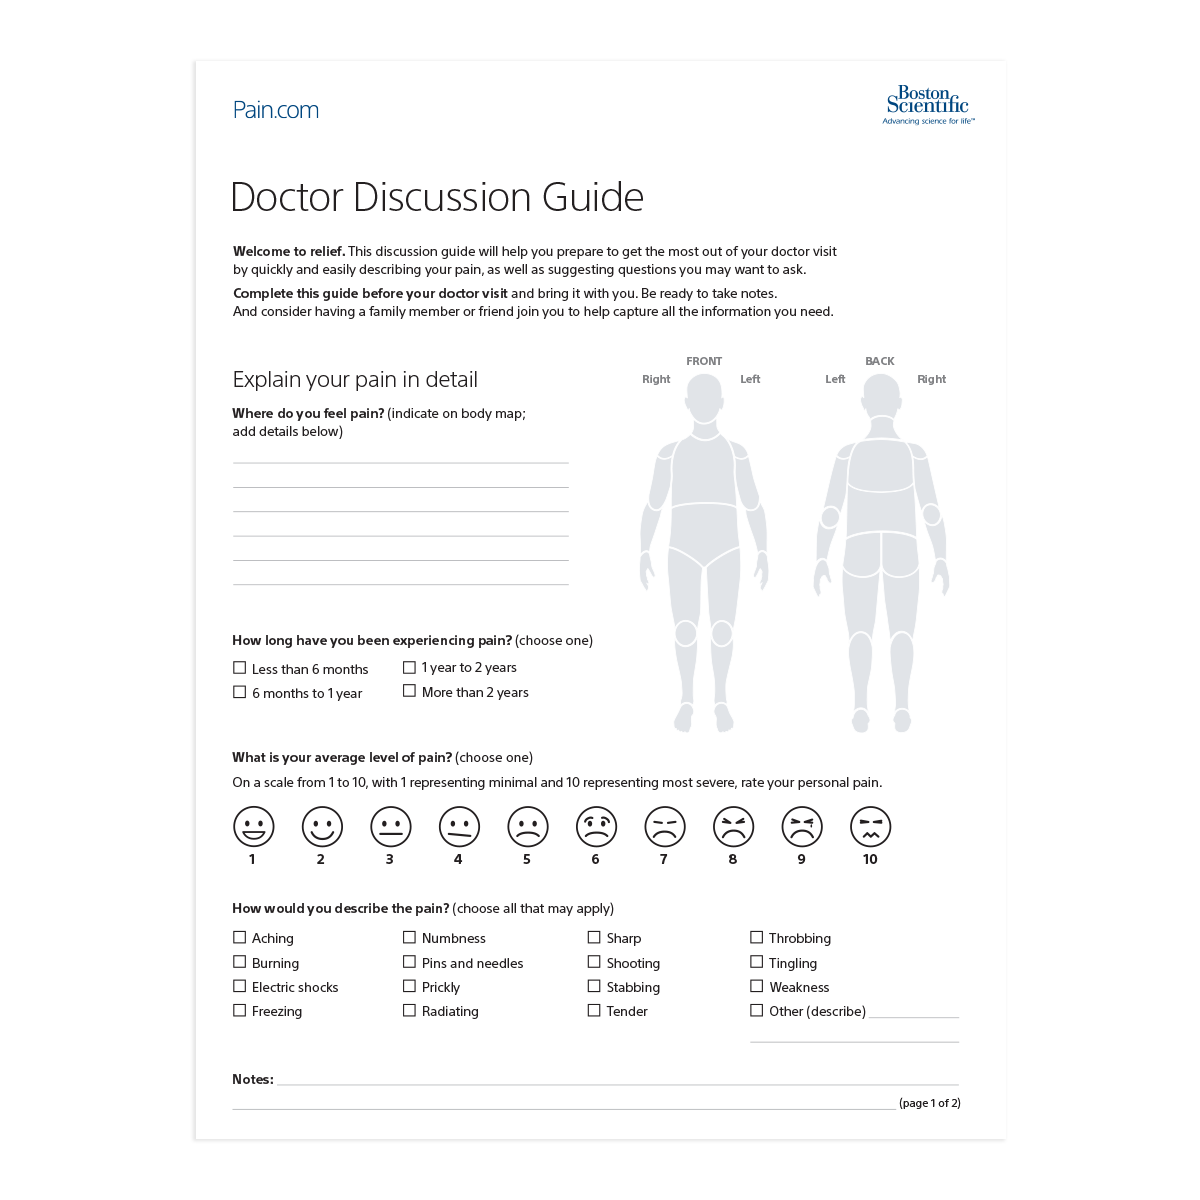 Form titled “Doctor Discussion Guide”.